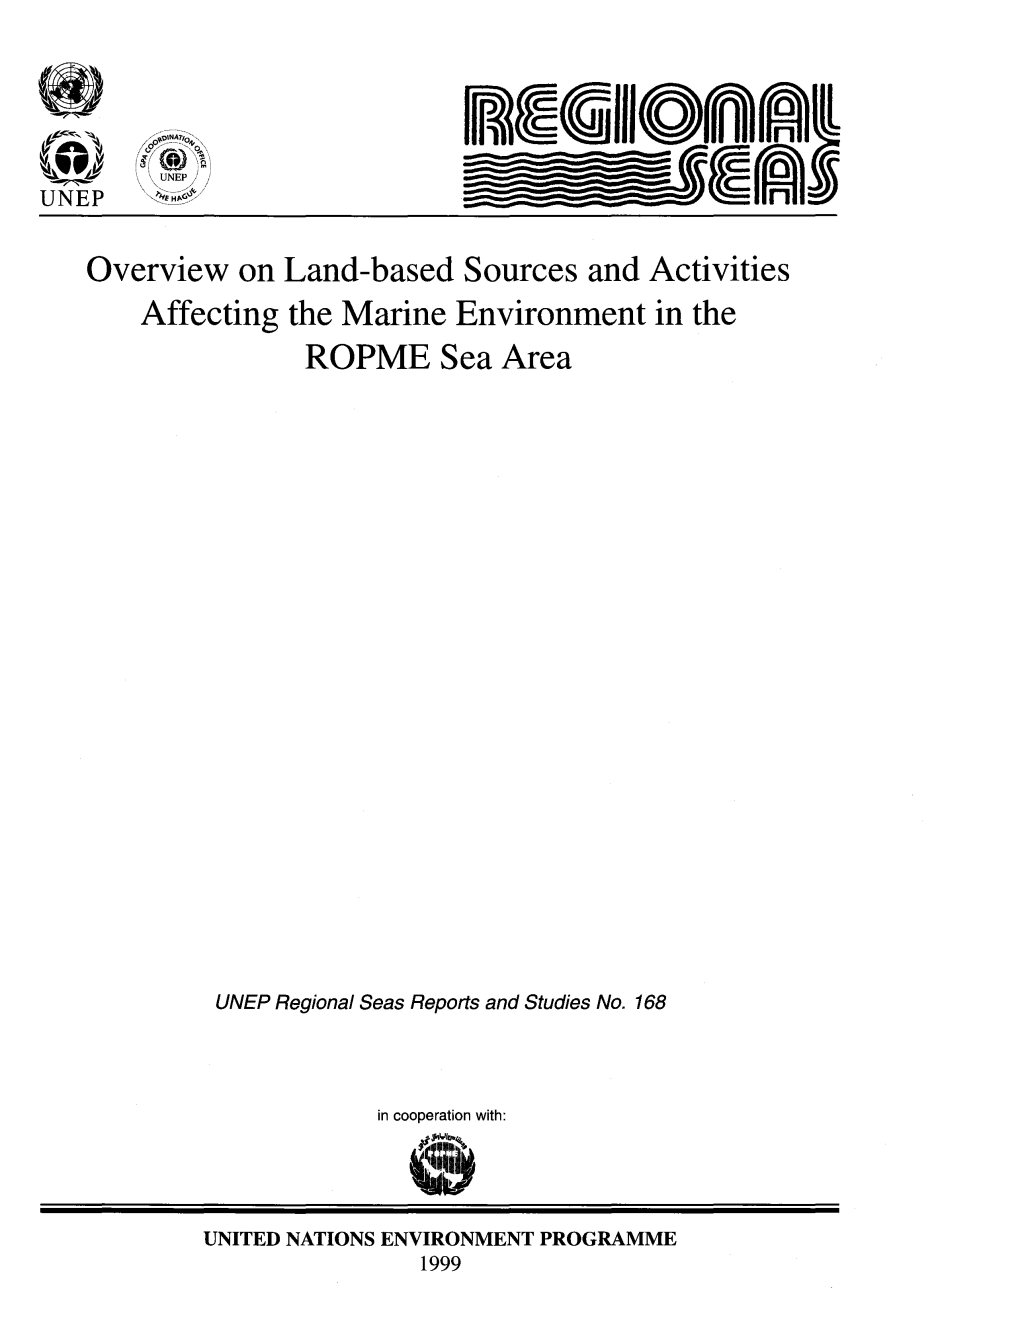 Overview on Land-Based Sources and Activities Affecting the Marine Environment in the ROPME Sea Area